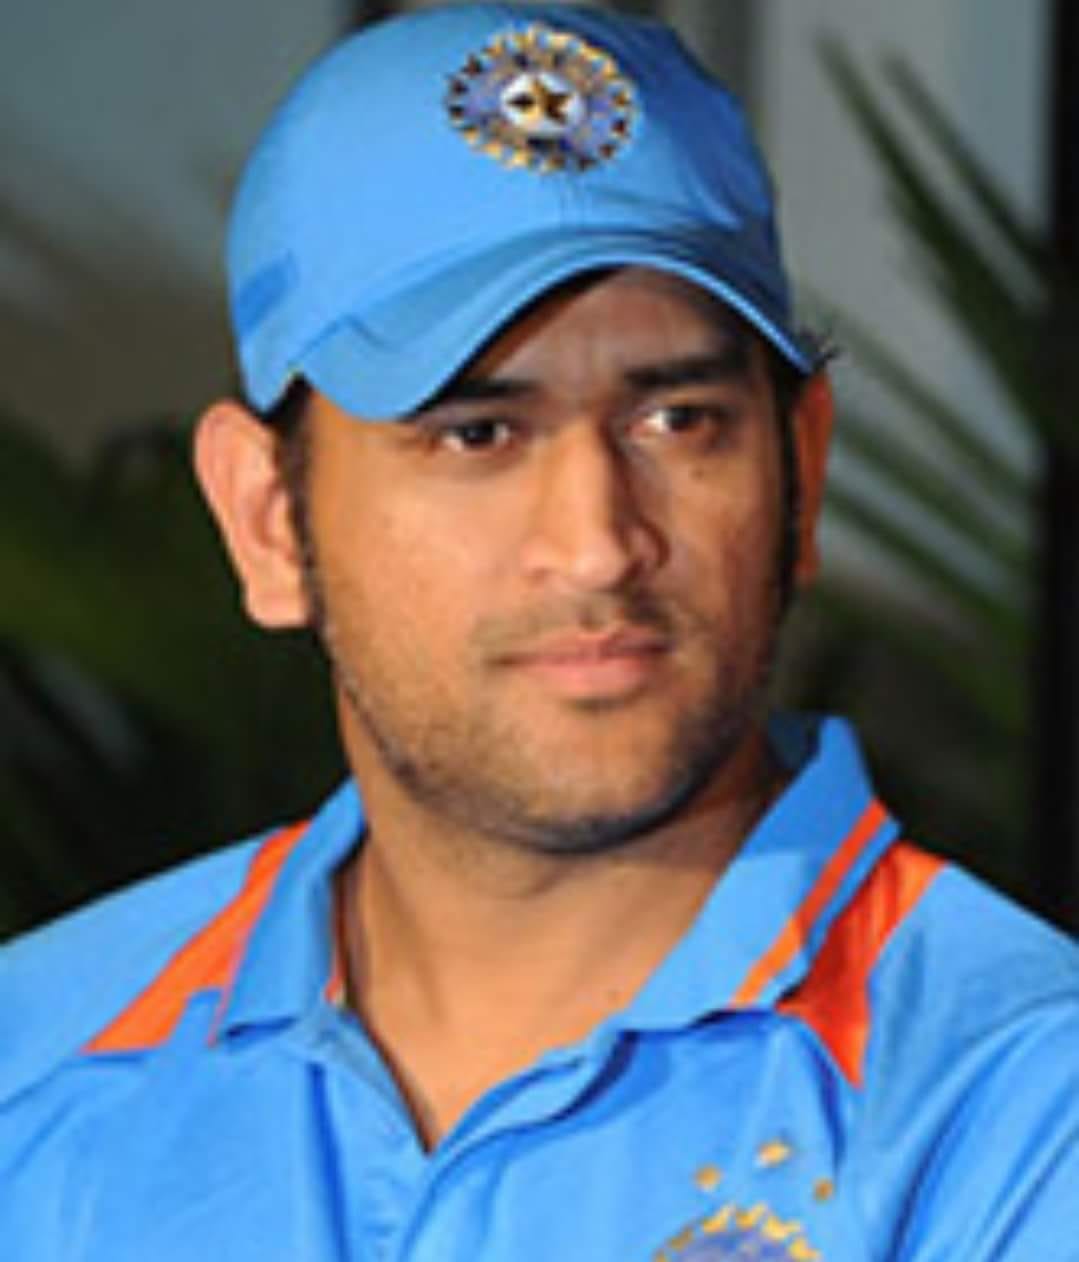 You will be surprised to hear MS Dhoni's favorite batsman बल्लेबाज़